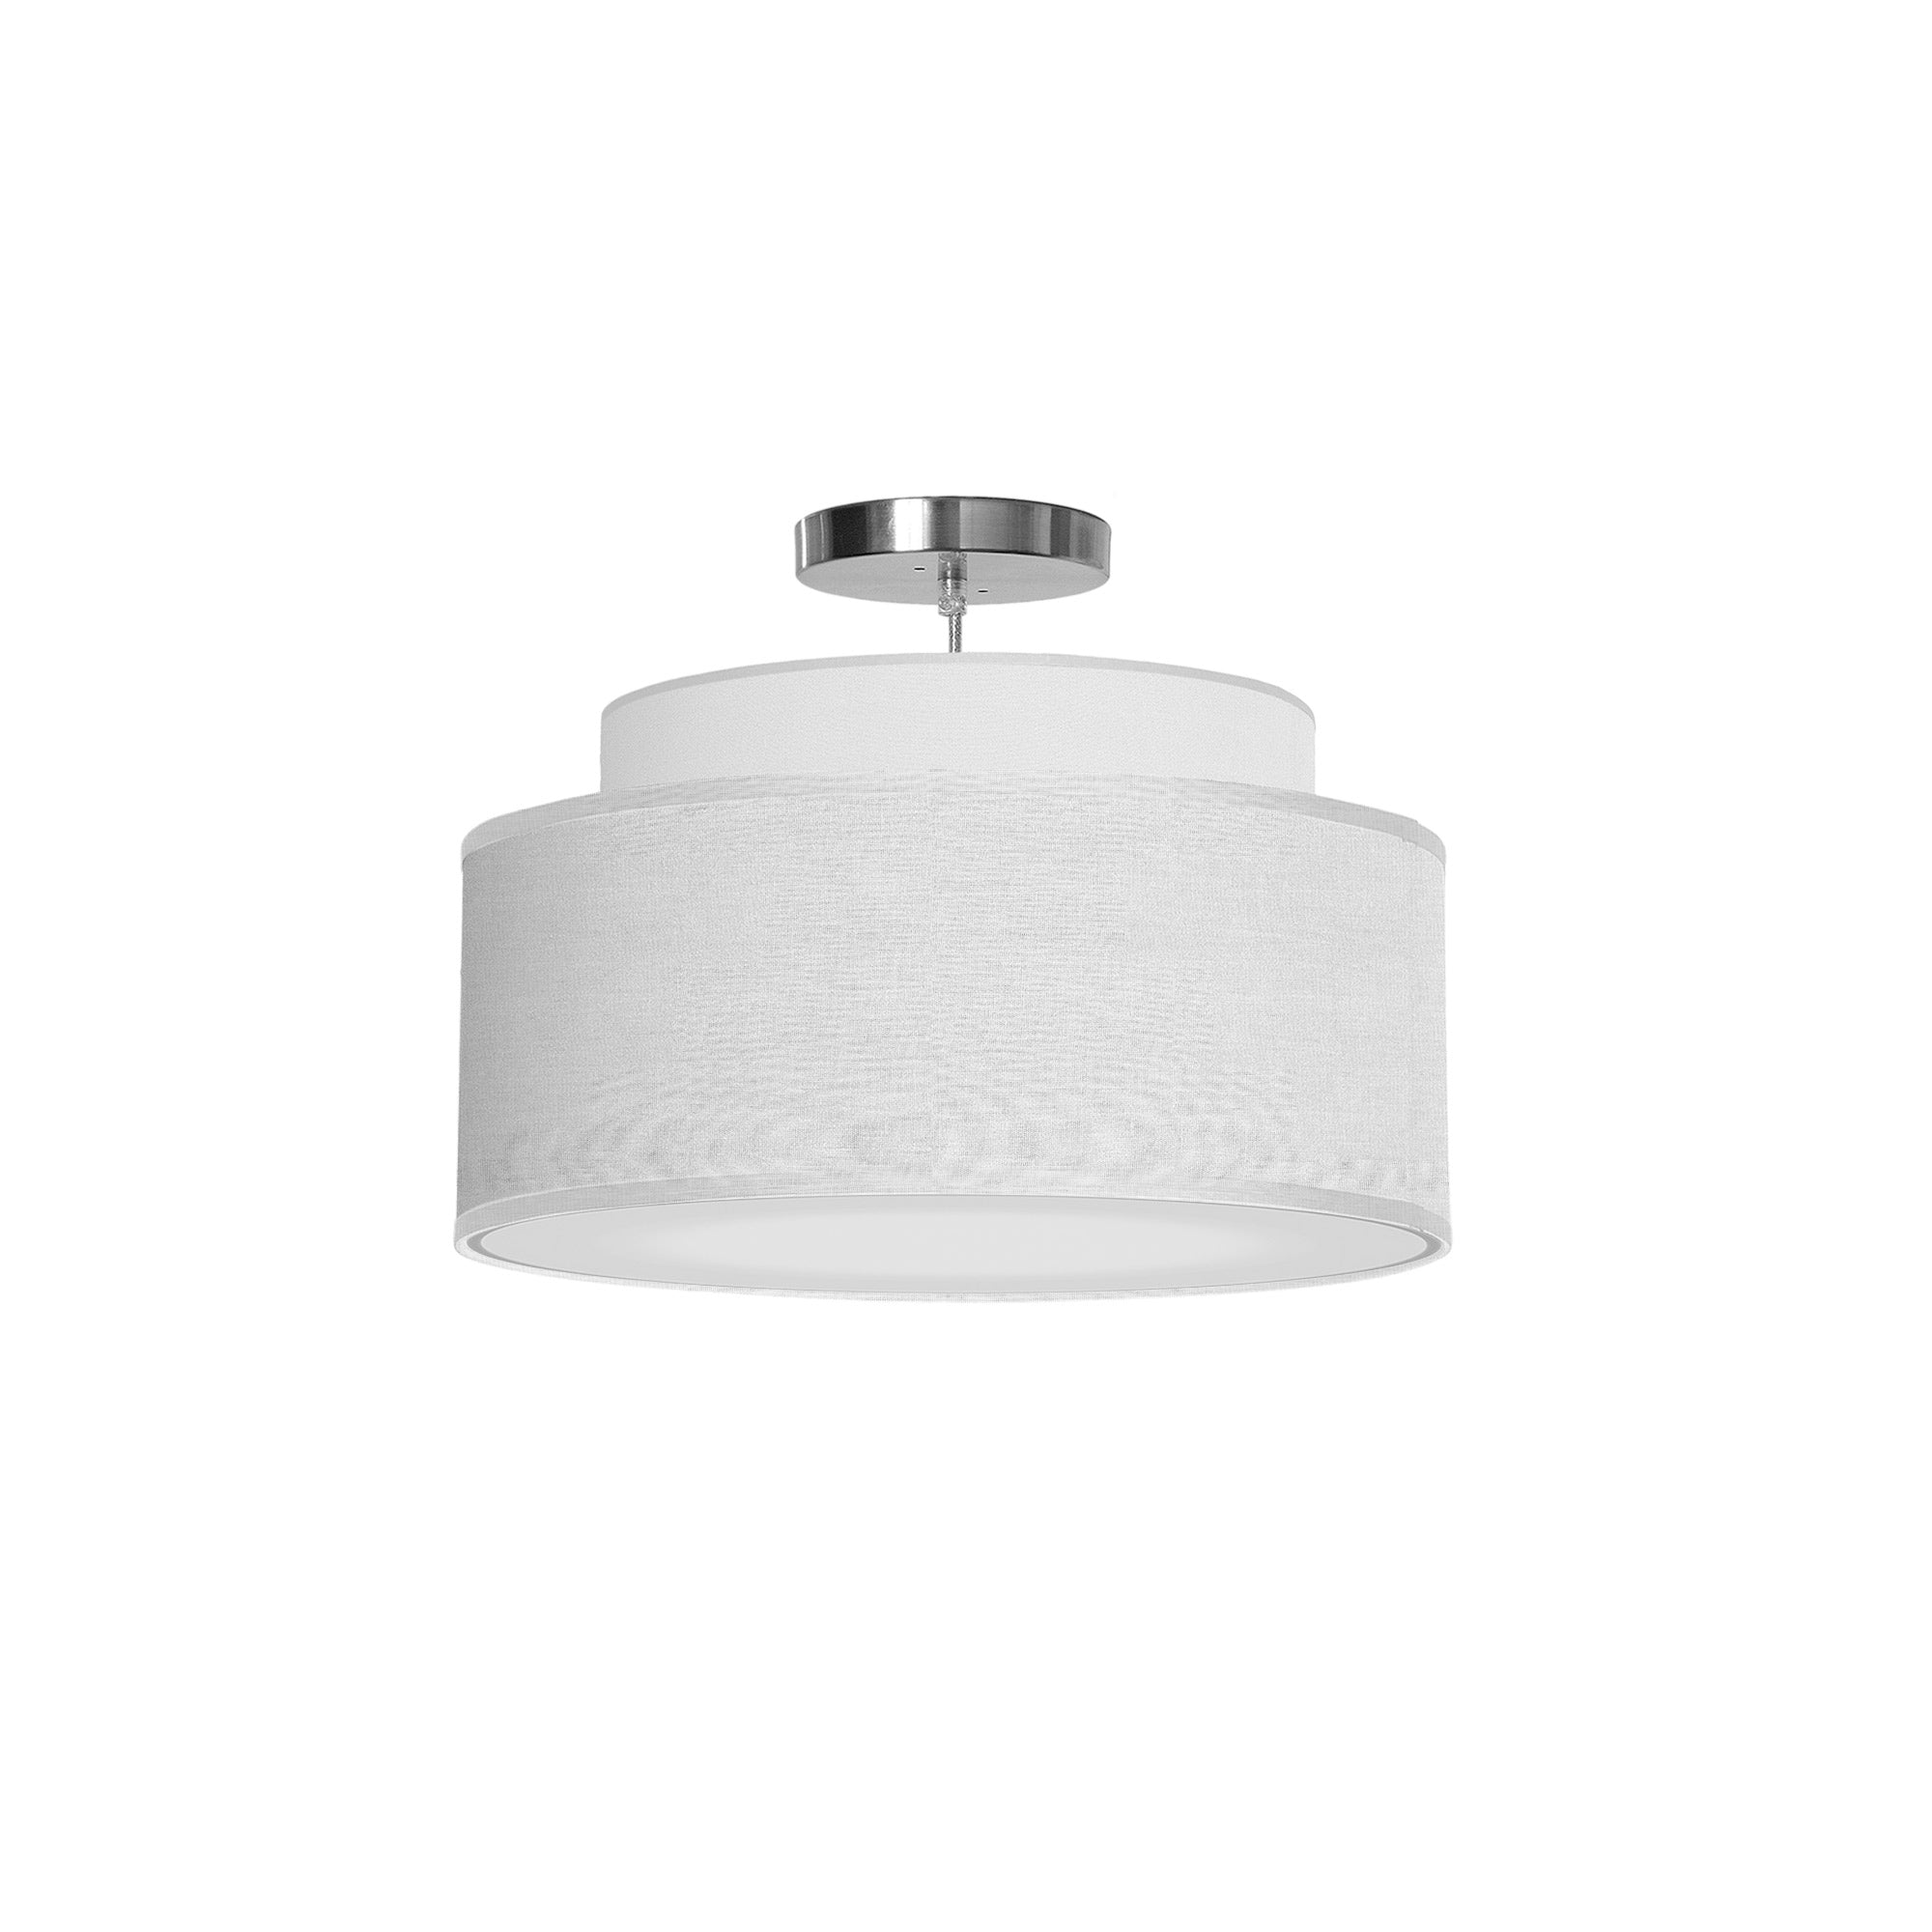 The Elsa Hanging Lamp from Seascape Fixtures with a linen shade in white color.